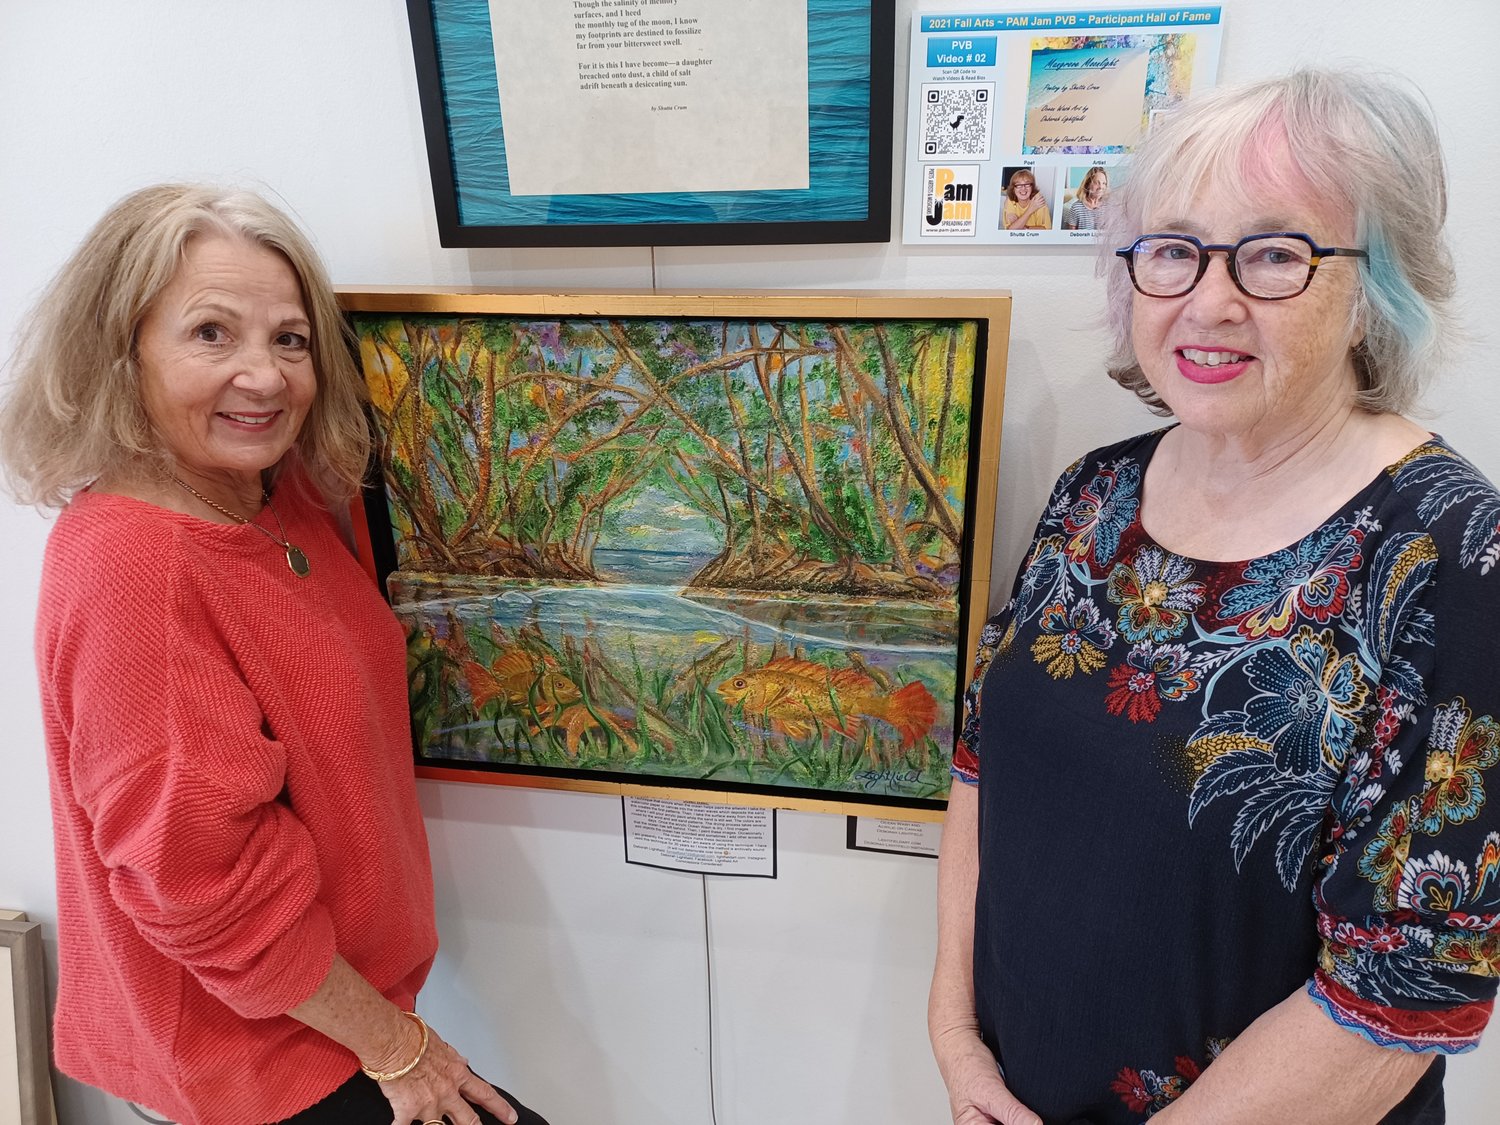 Deborah Lightfield, left, created her painting based on a poem by Shutta Crum, right. The artwork and poem are part of a PAM Jam showcase on display at the Ponte Vedra Library.